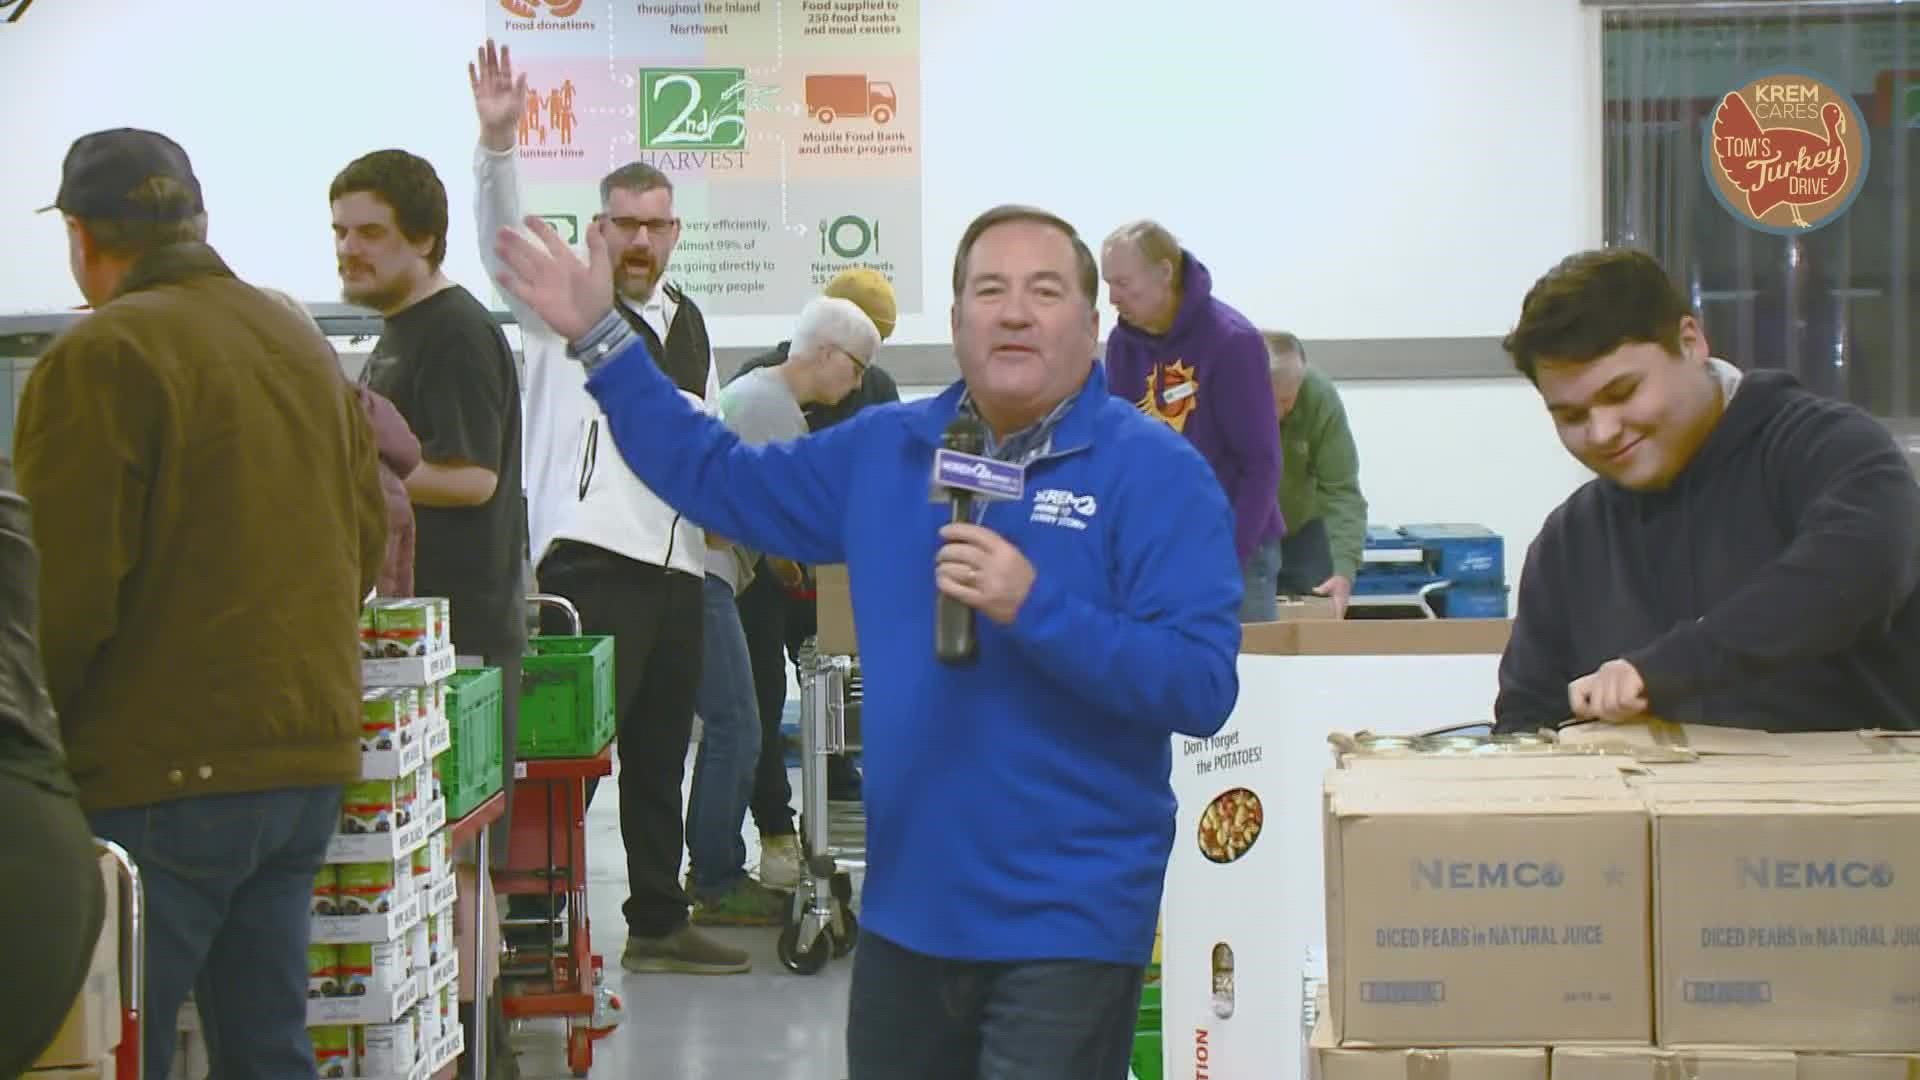 KREM Cares will give out 11,000 Tom's Turkey Drive meals to local families. Boxes are available today at the Spokane County Fairgrounds.